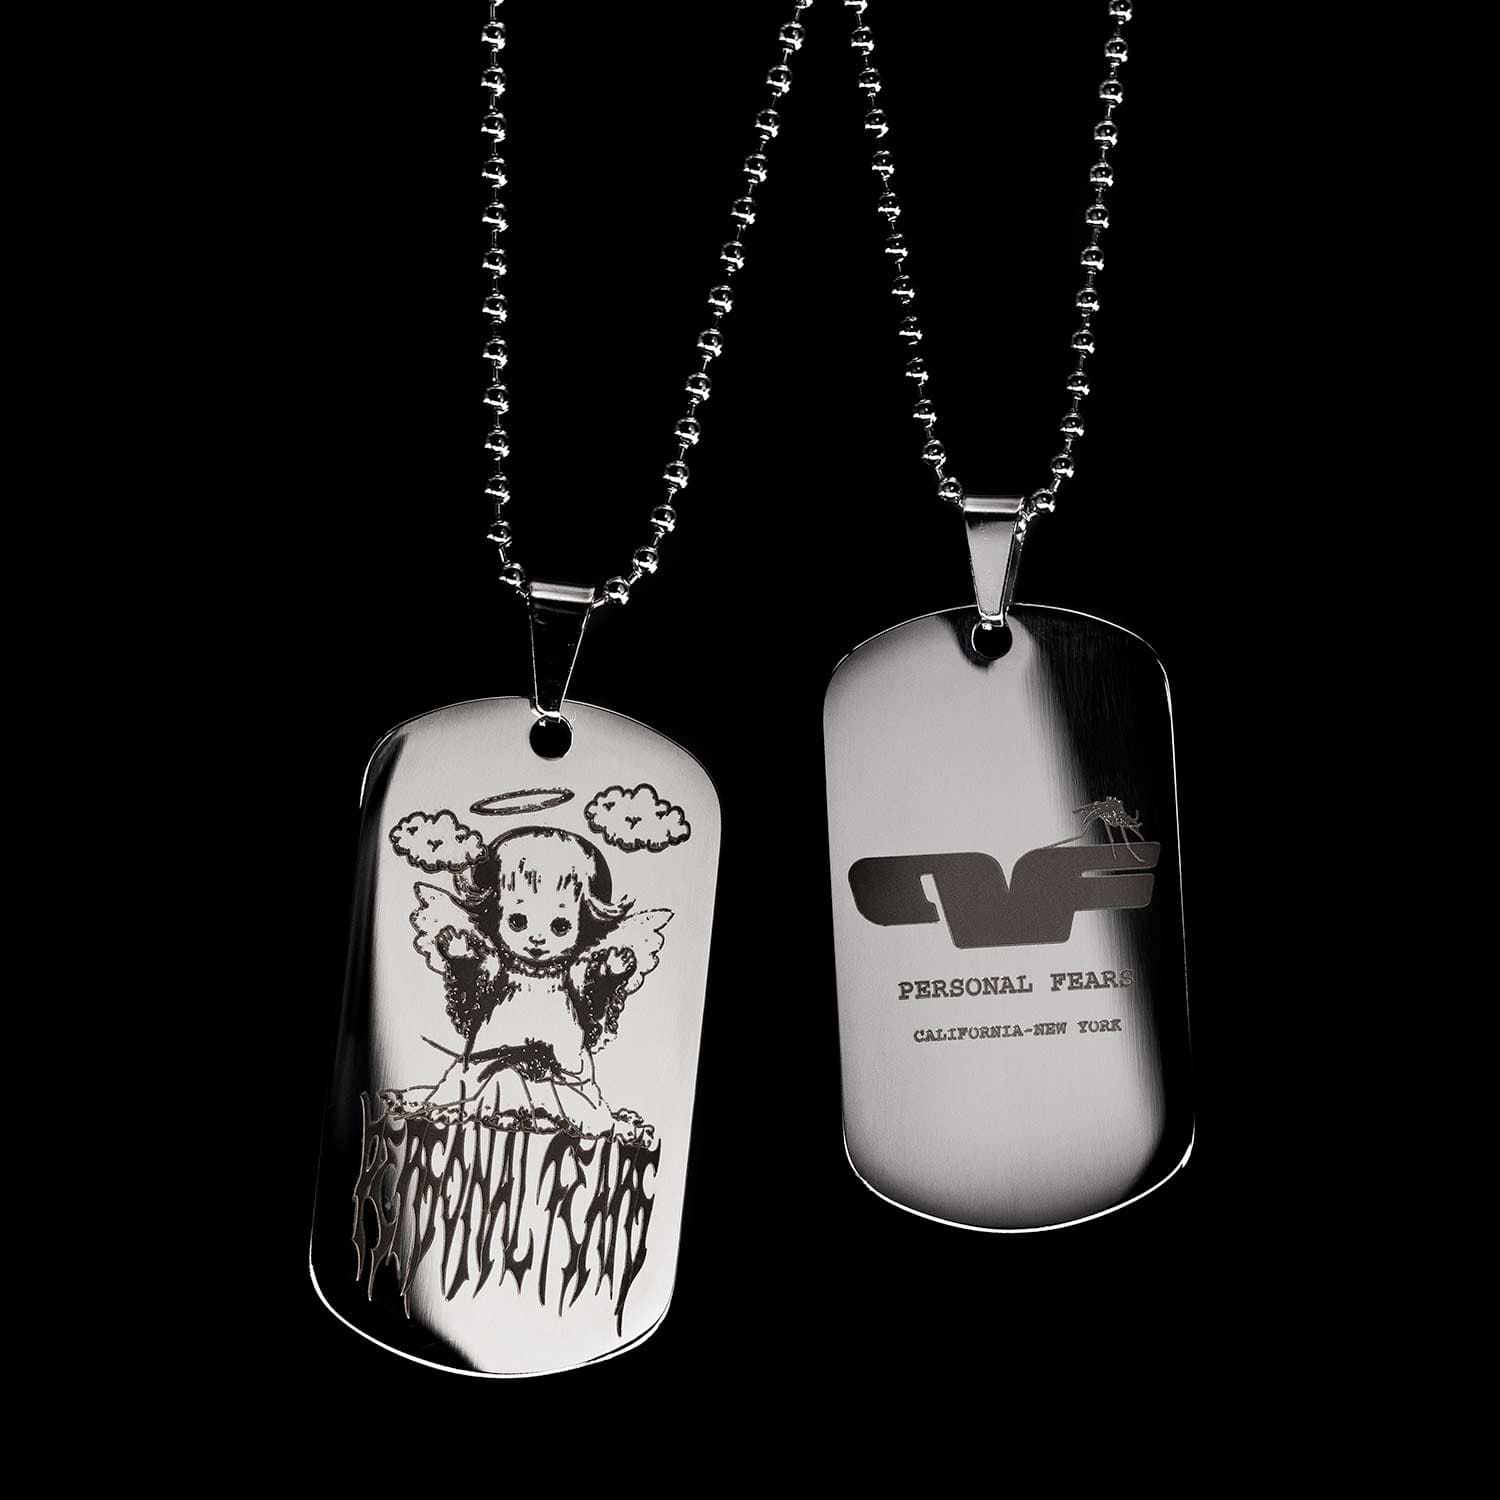 Personal Fears Dog Tag